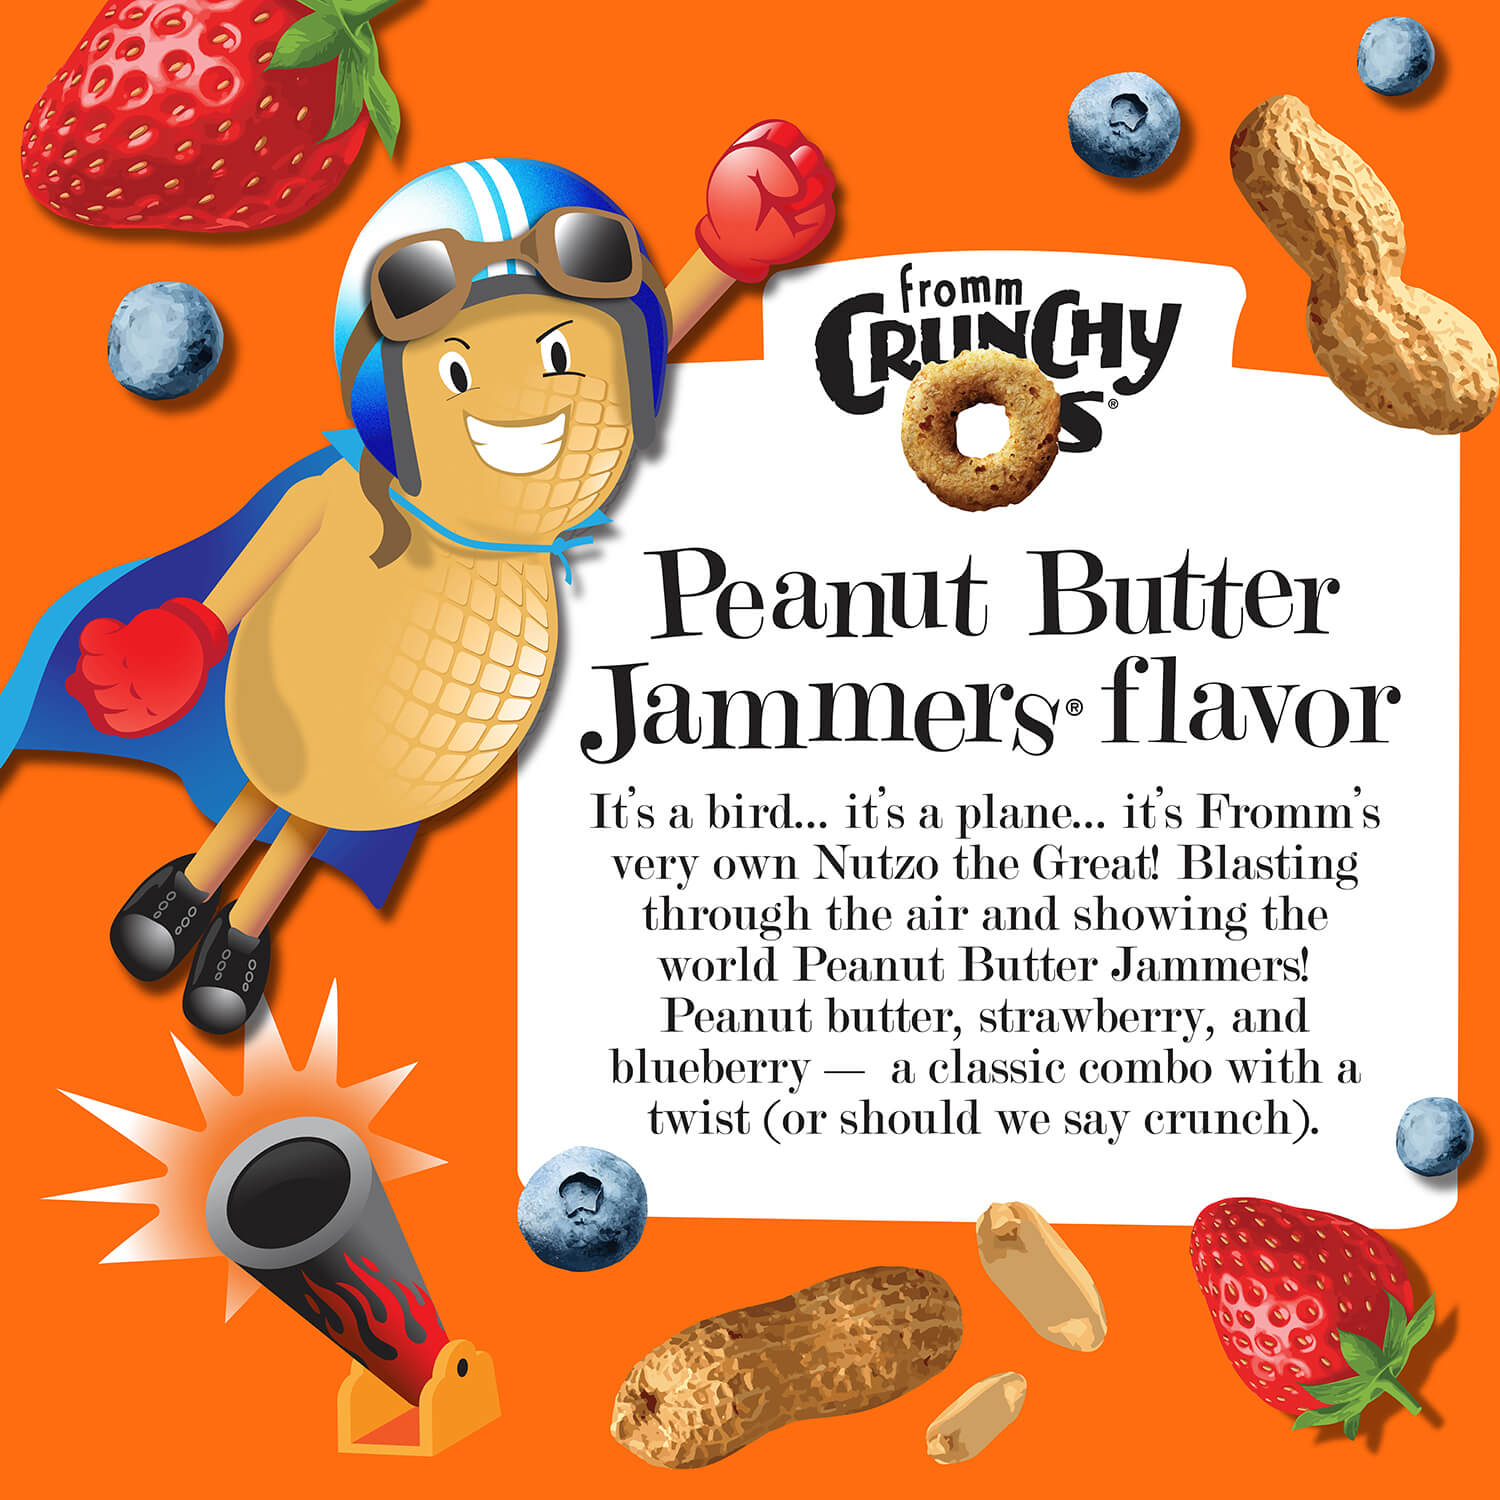 Fromm Crunchy Os Peanut Butter Jammers Flavored Dog Treats